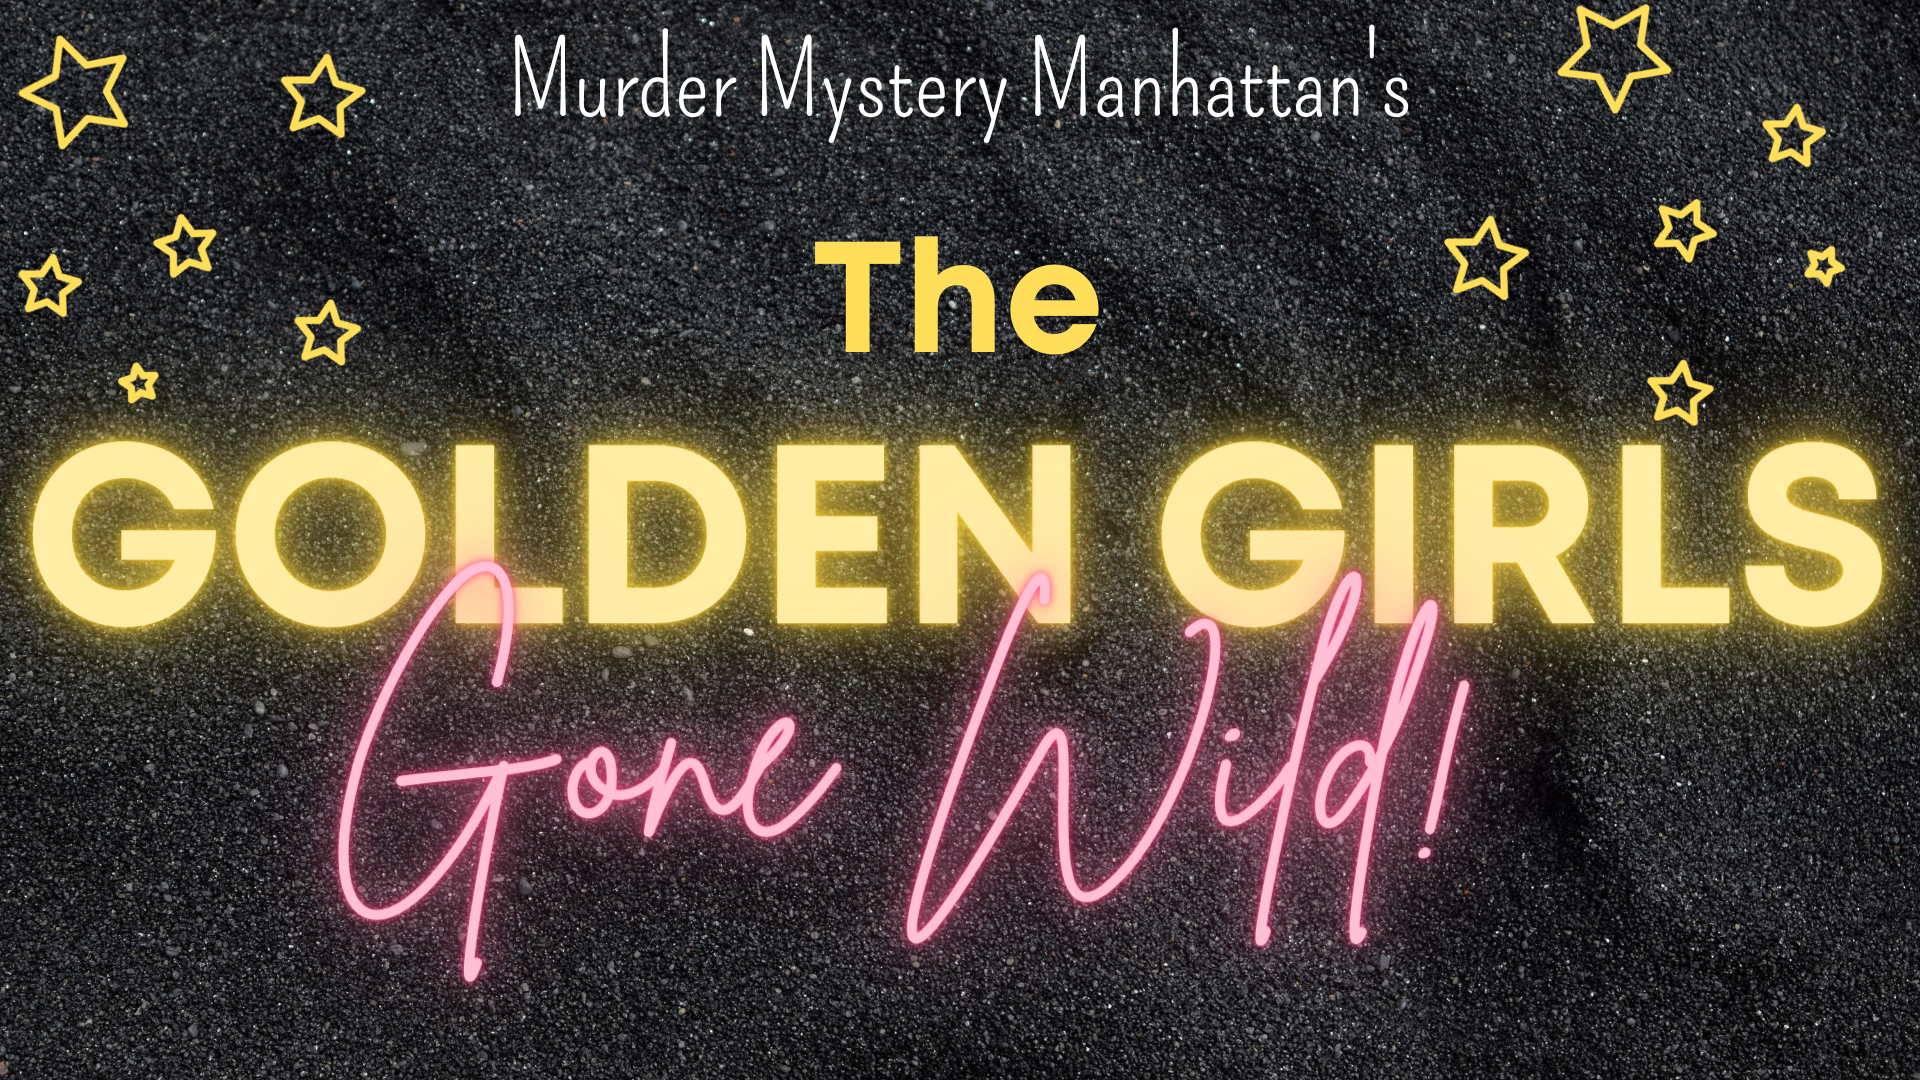 THE GOLDEN GIRLS GONE WILD! DIRECT FROM NY - A HILARIOUS INTERACTIVE MURDER MYSTERY BASED ON THE HIT TV SERIES "THE GOLDEN GIRLS"